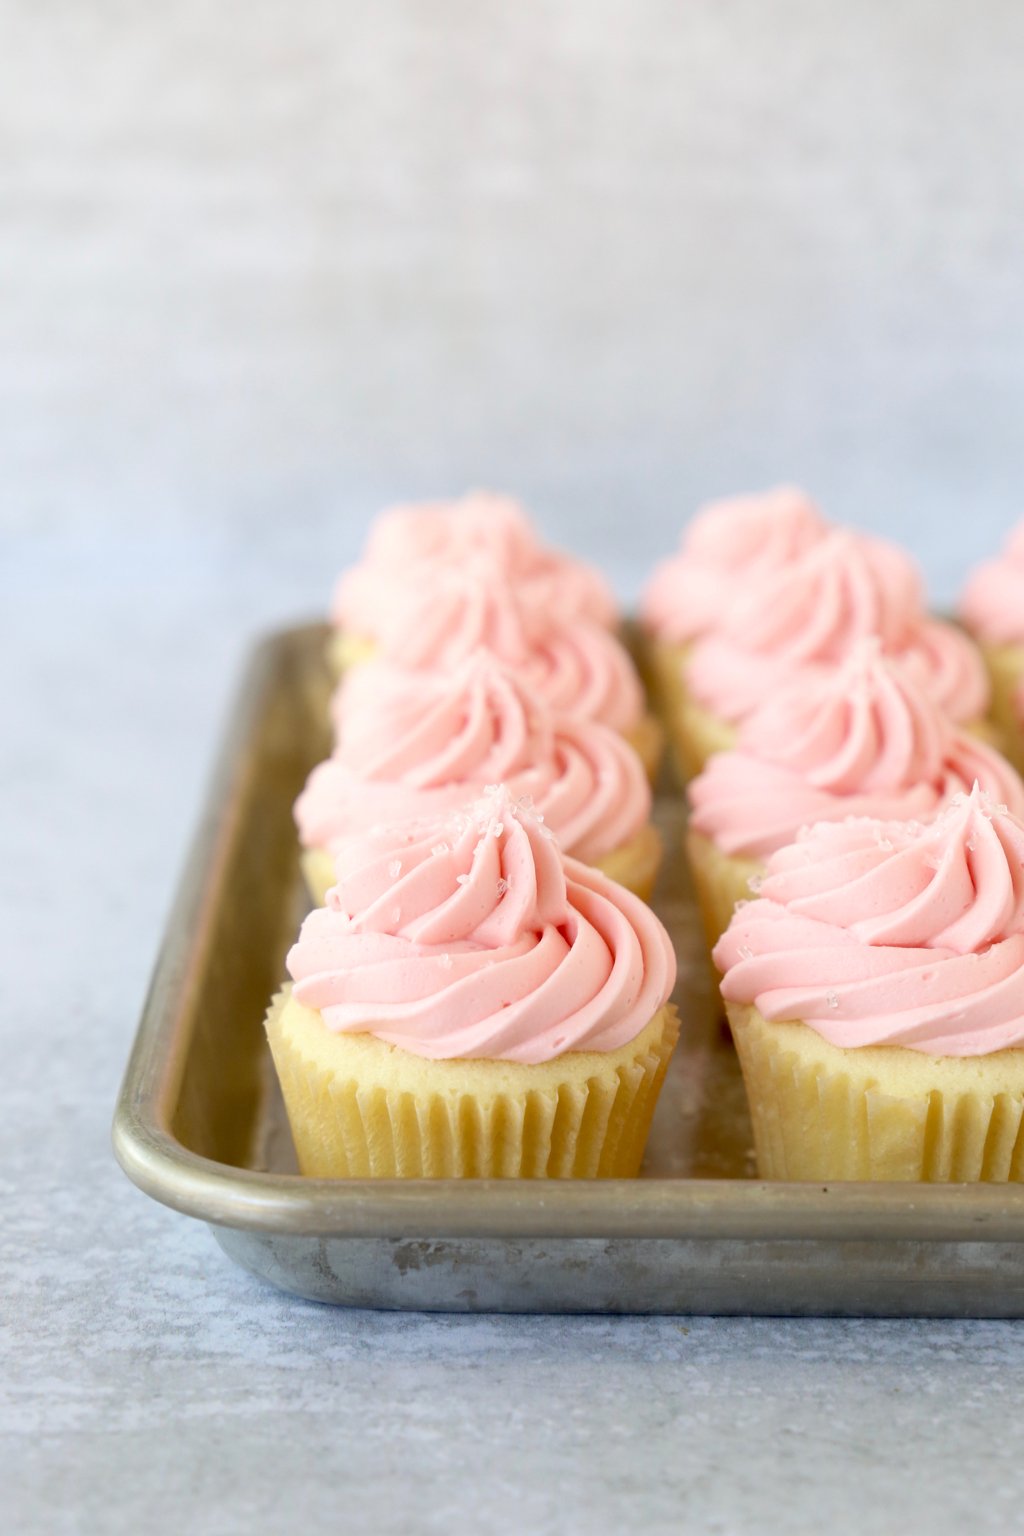 A baking sheet filled with vanilla cupcakes with pink frosting.